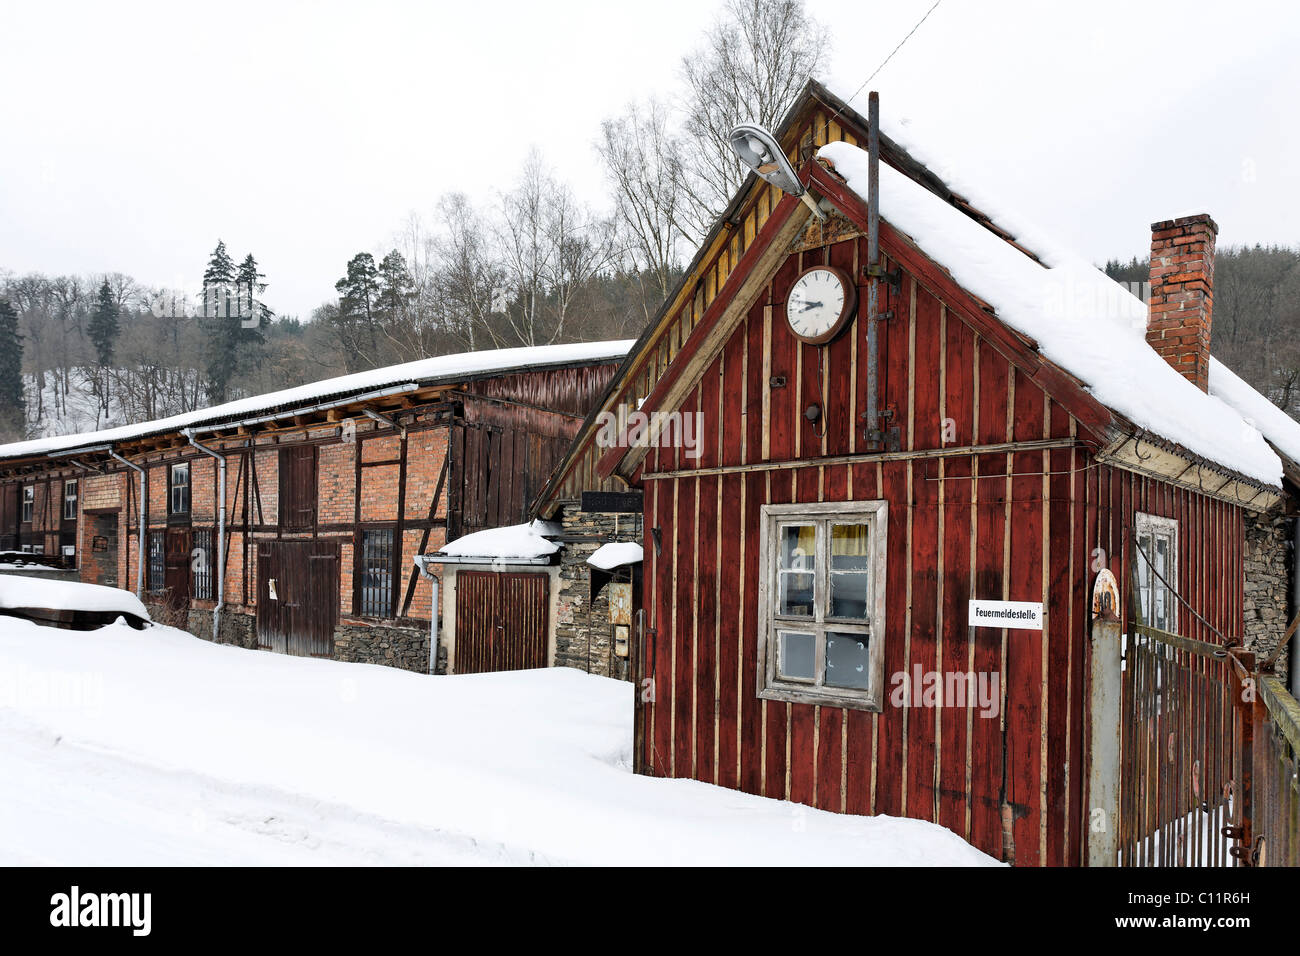 Building of the former Maegdesprung ironworks, snow, Harzgerode, Harz, Saxony-Anhalt, Germany, Europe Stock Photo